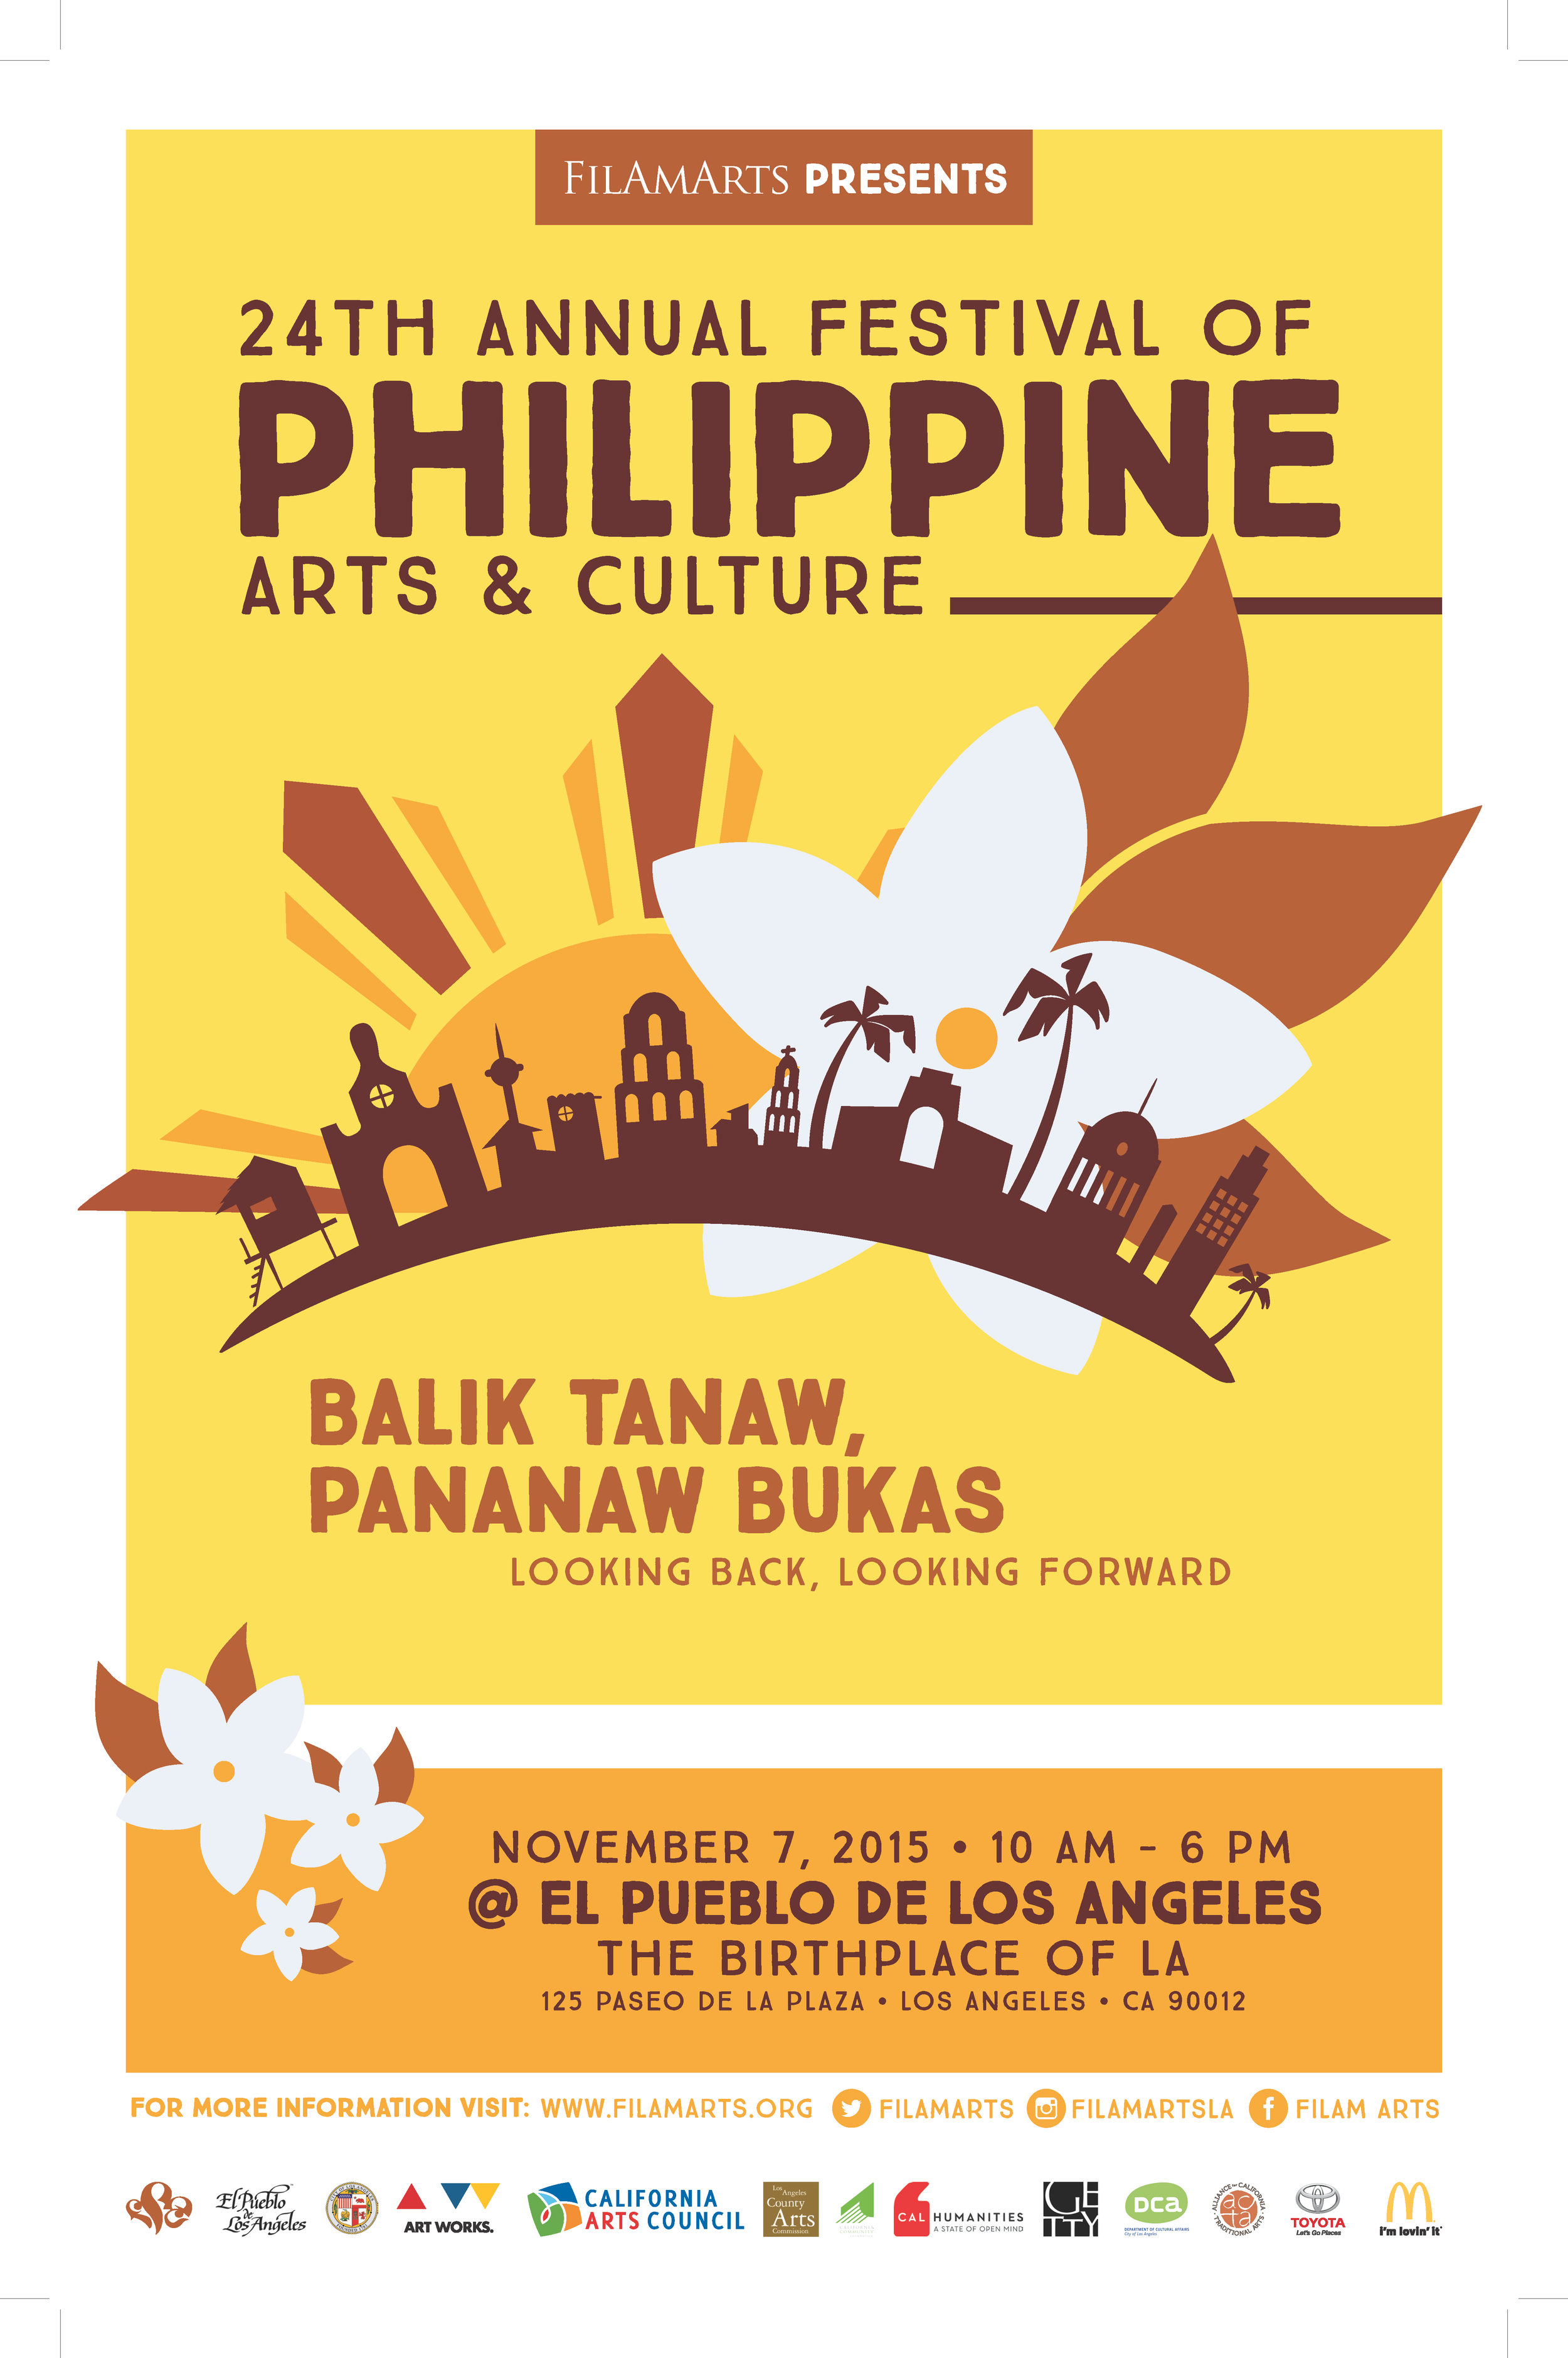 Announcing the 24th Annual Festival of Philippine Arts & Culture